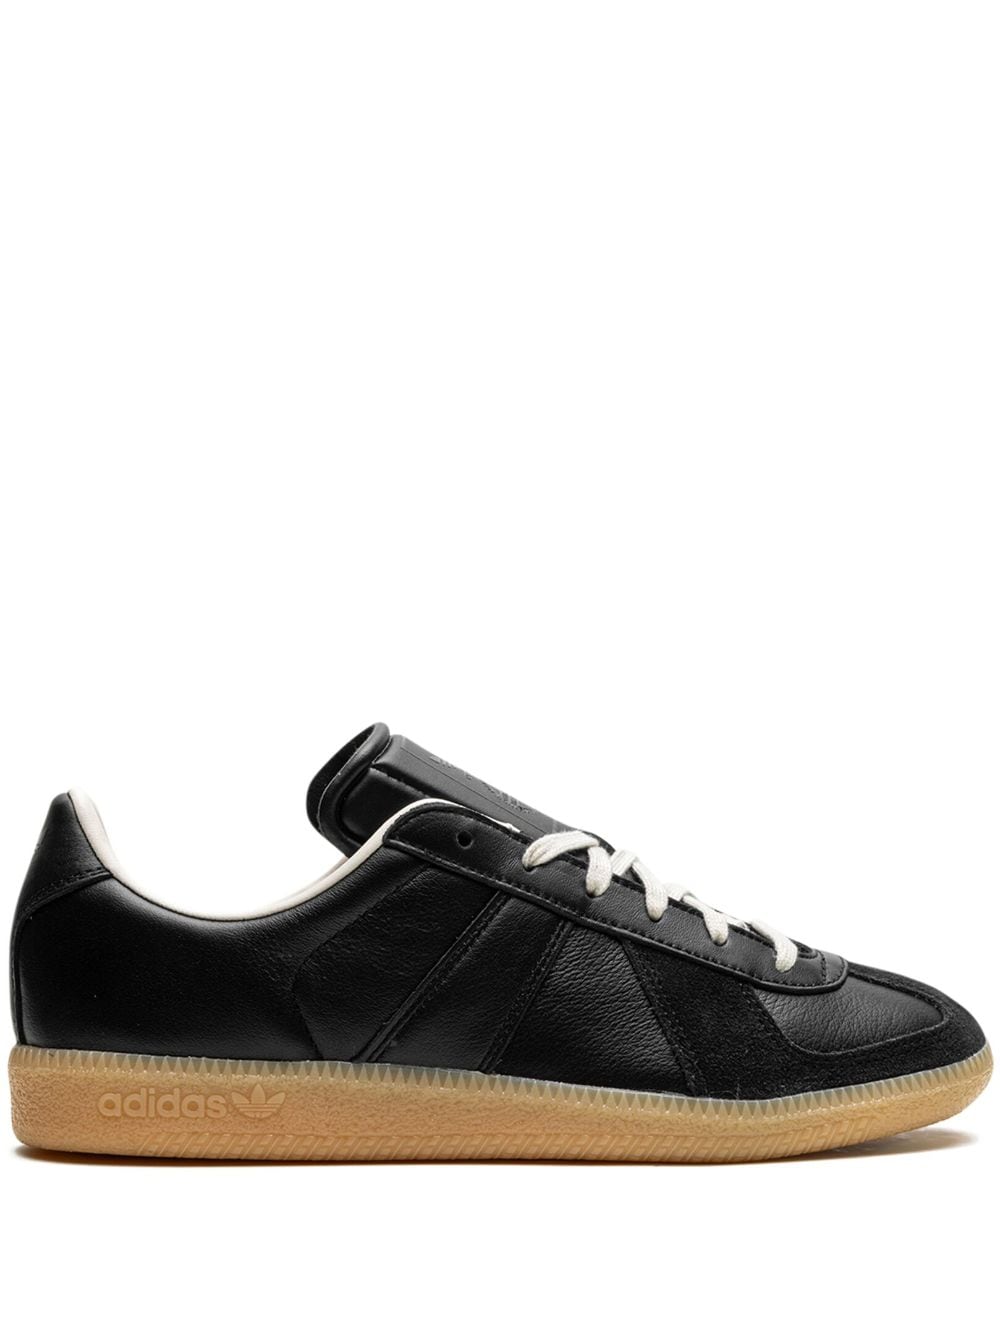 BW Army "Black/Gum" sneakers